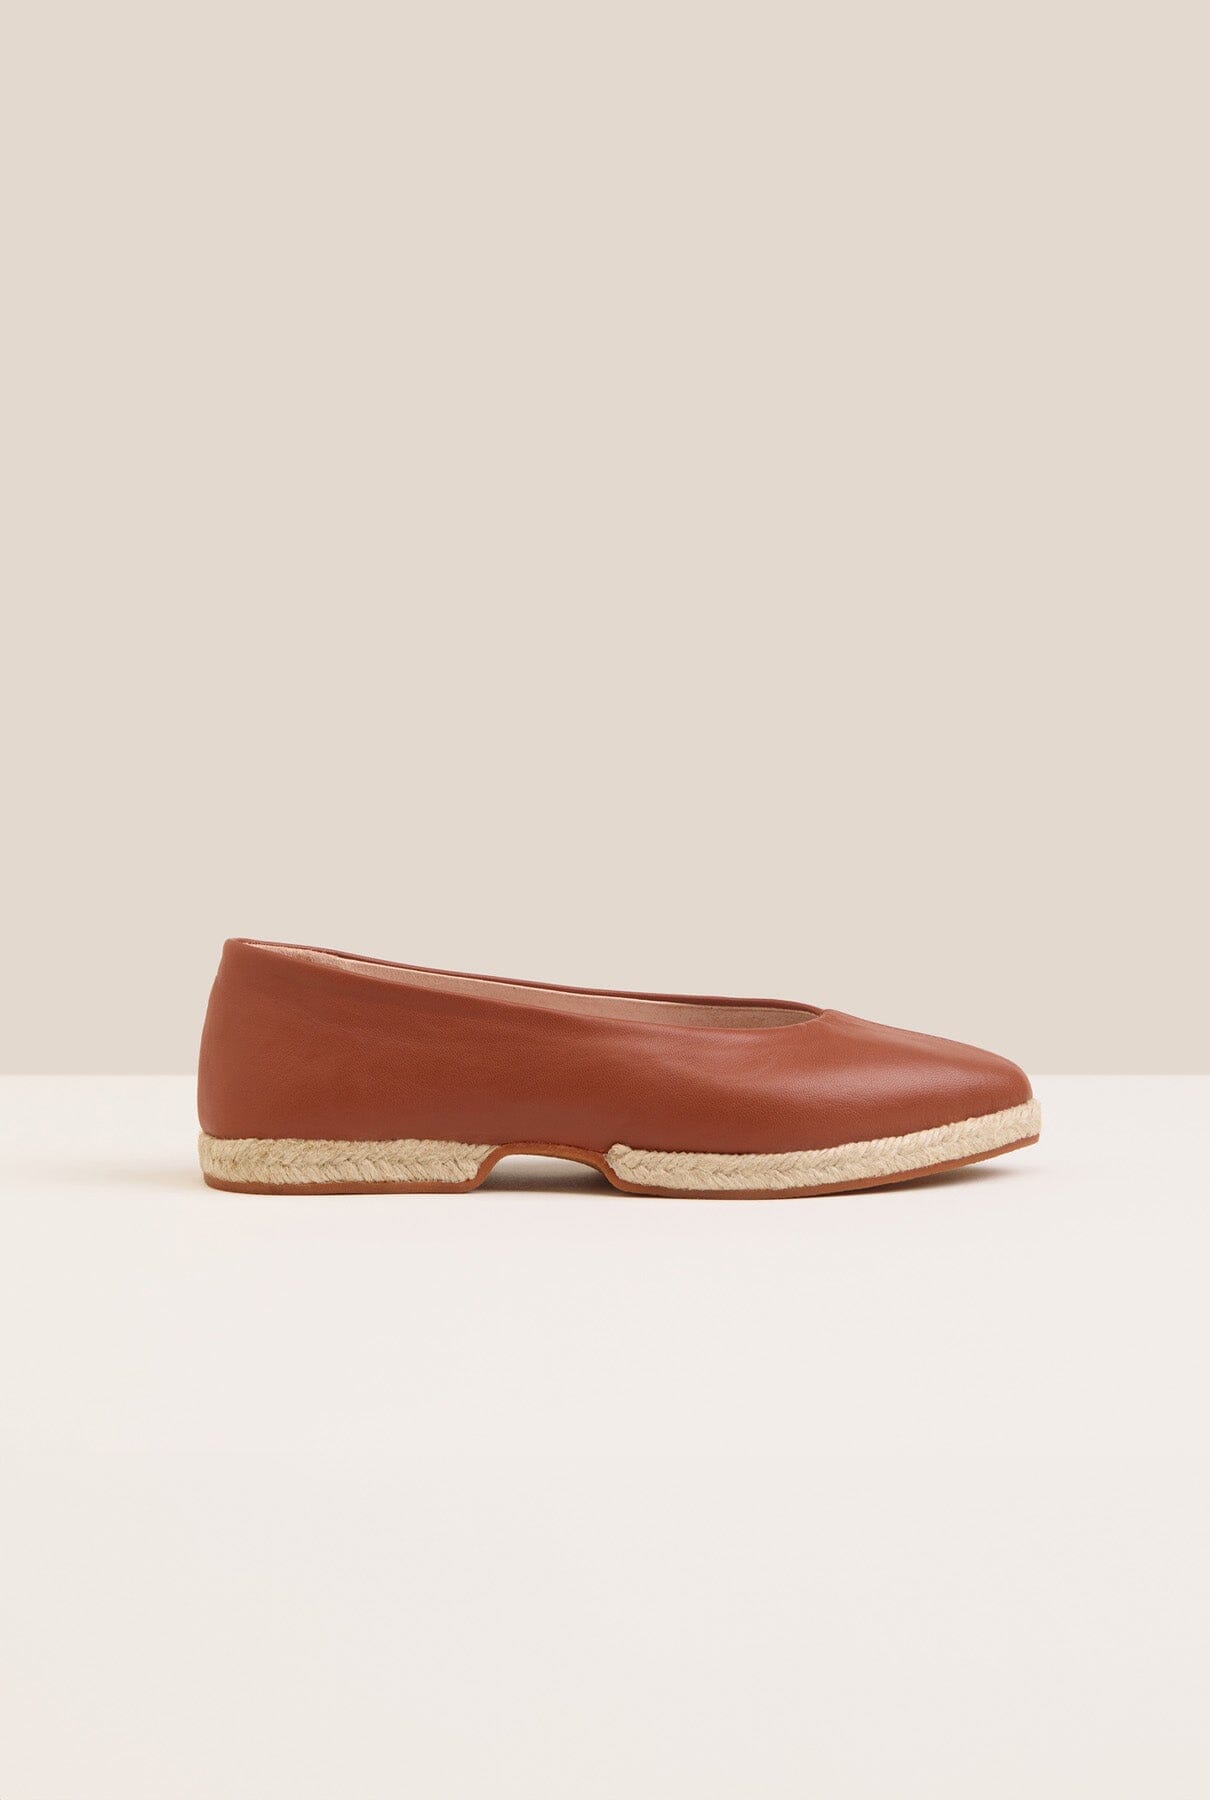 Illy Nutshell Flat shoes Gaimo 